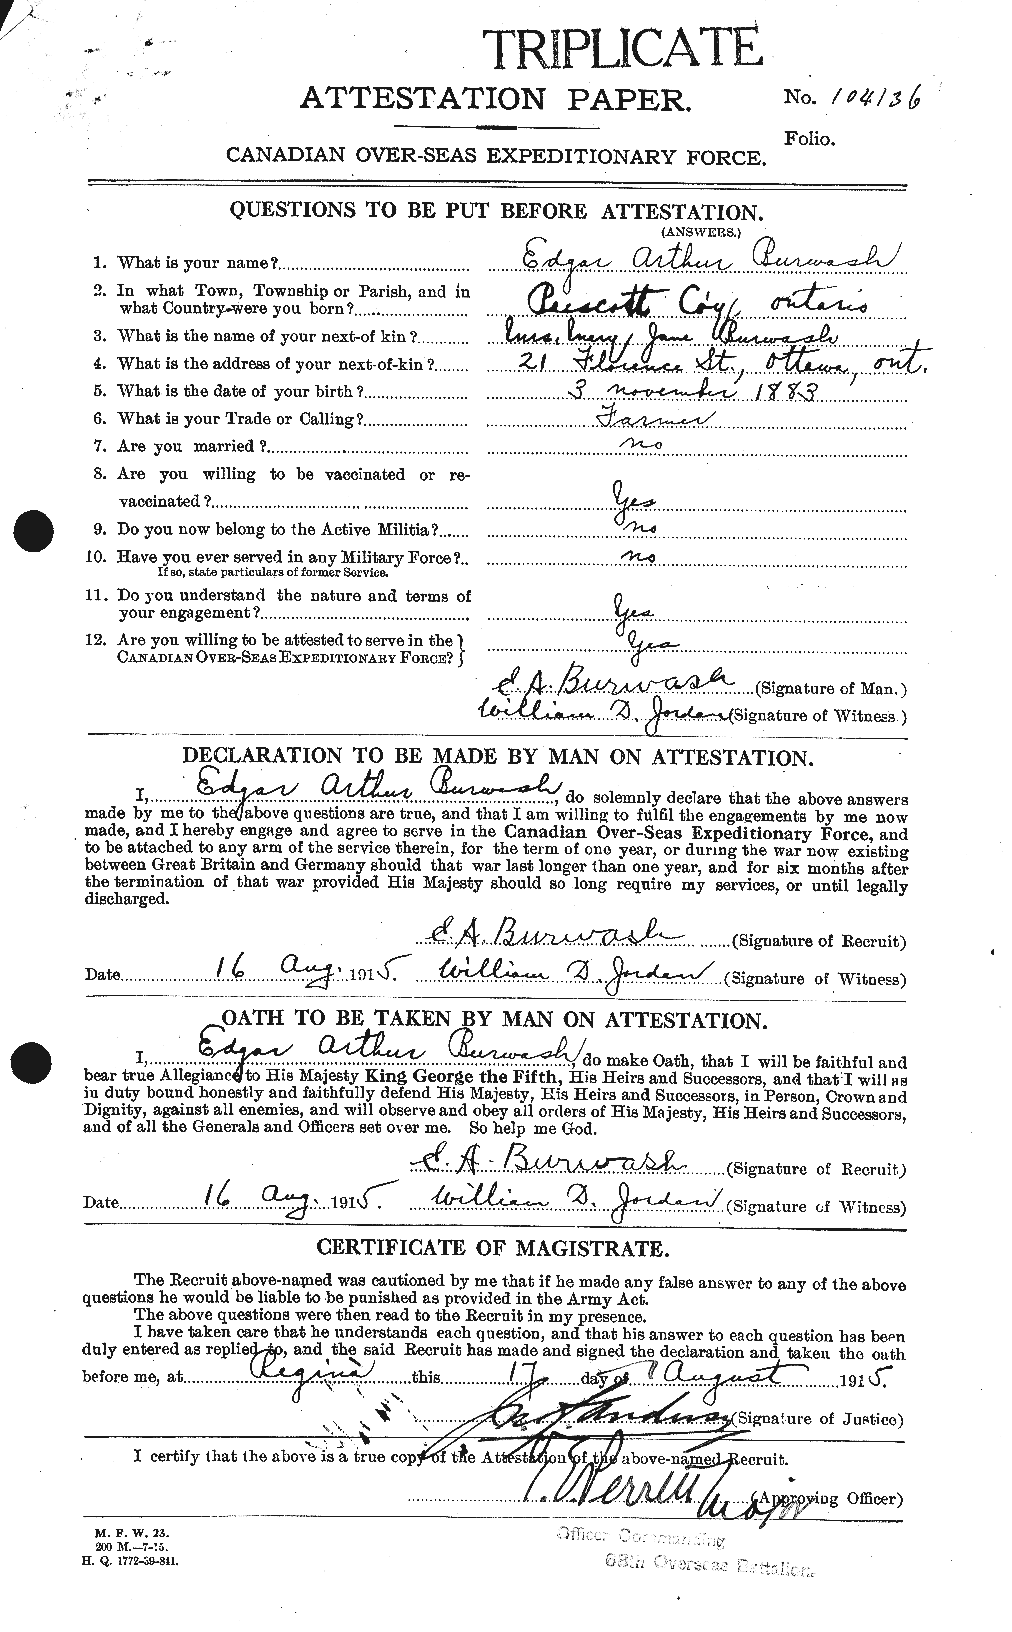 Personnel Records of the First World War - CEF 272802a